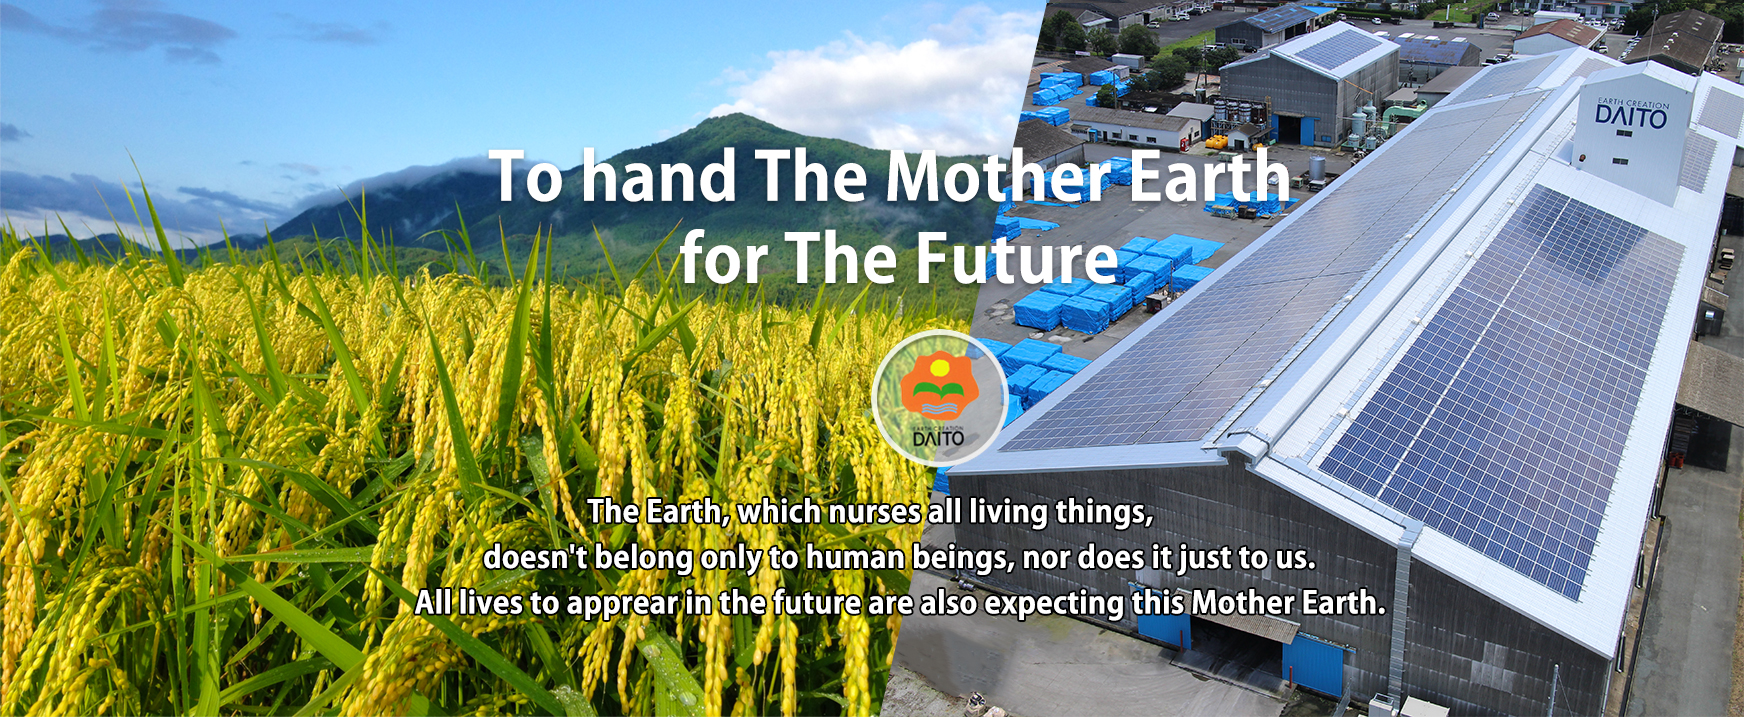 To hand The Mother Earth for The Future